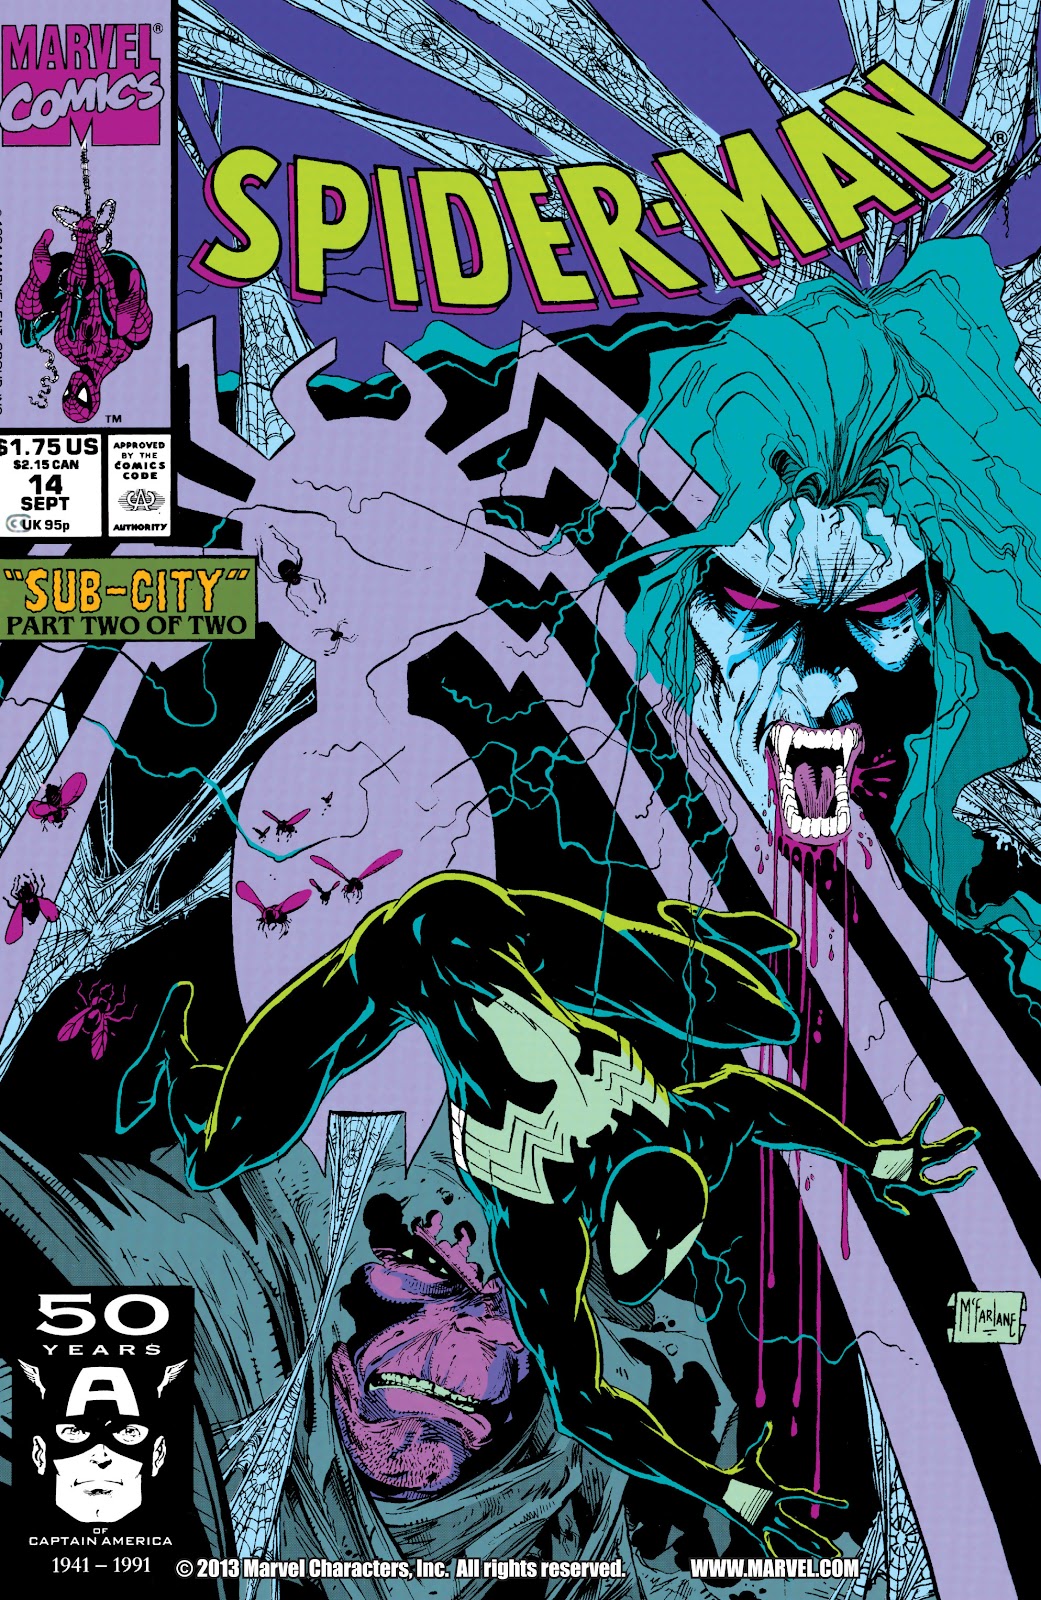 Spider-Man (1990) issue 14 - Sub City Part 2 of 2 - Page 1